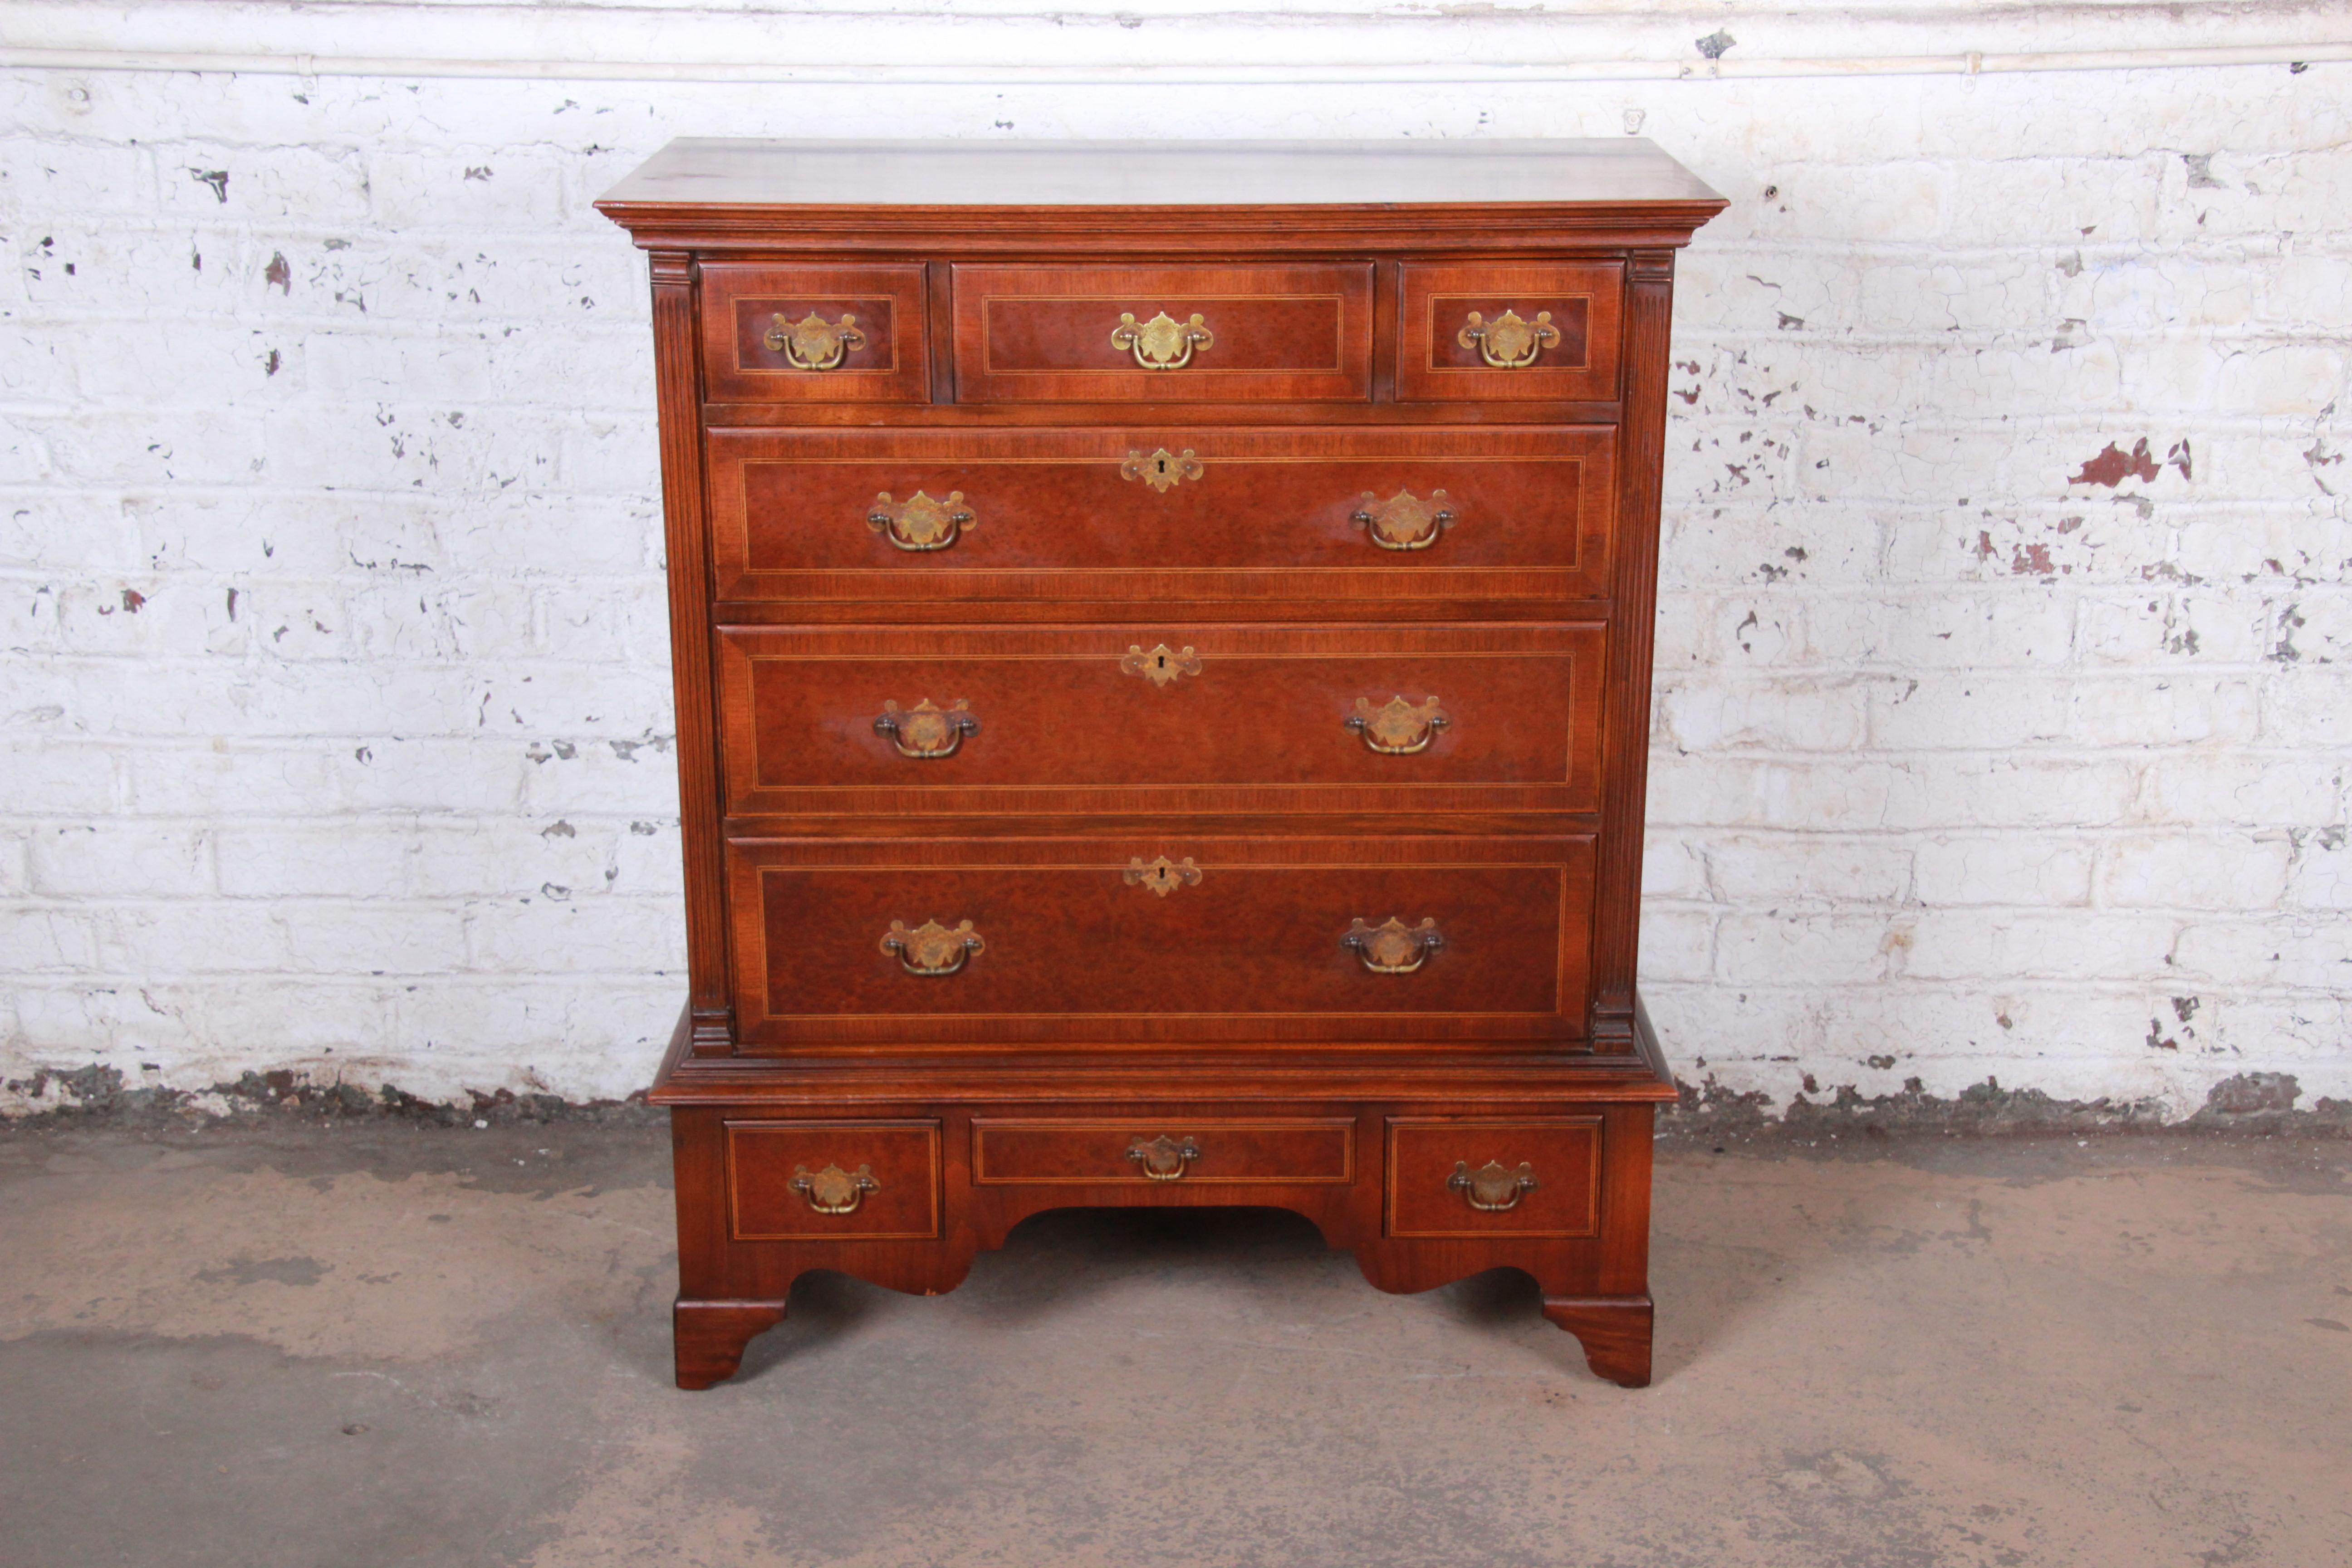 An exceptional mahogany and bird's-eye maple highboy chest of drawers by Kittinger Furniture. The dresser features gorgeous mahogany wood grain with inlaid bird's-eye maple drawer fronts. It offers excellent storage, with nine dovetailed drawers.